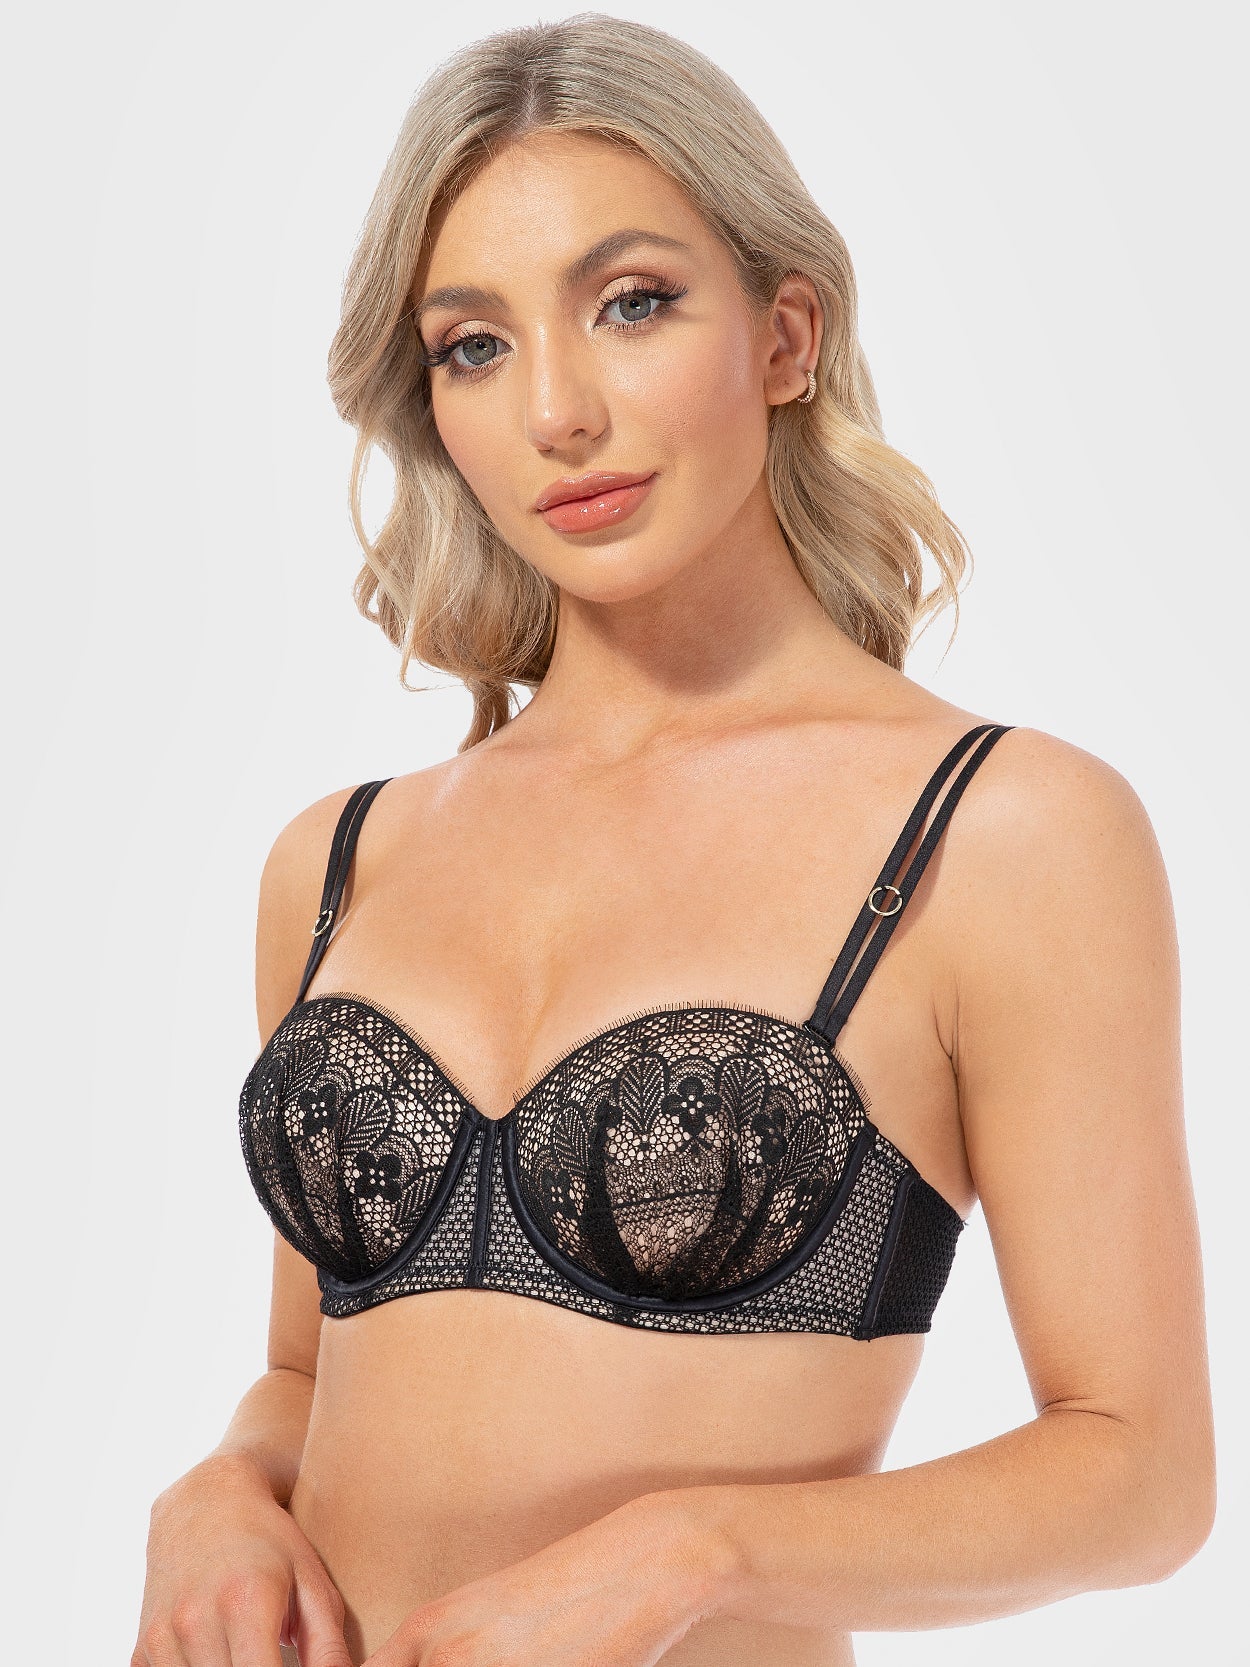 Deyllo Womens Strapless Push Up Full Cup Plus Size Nepal